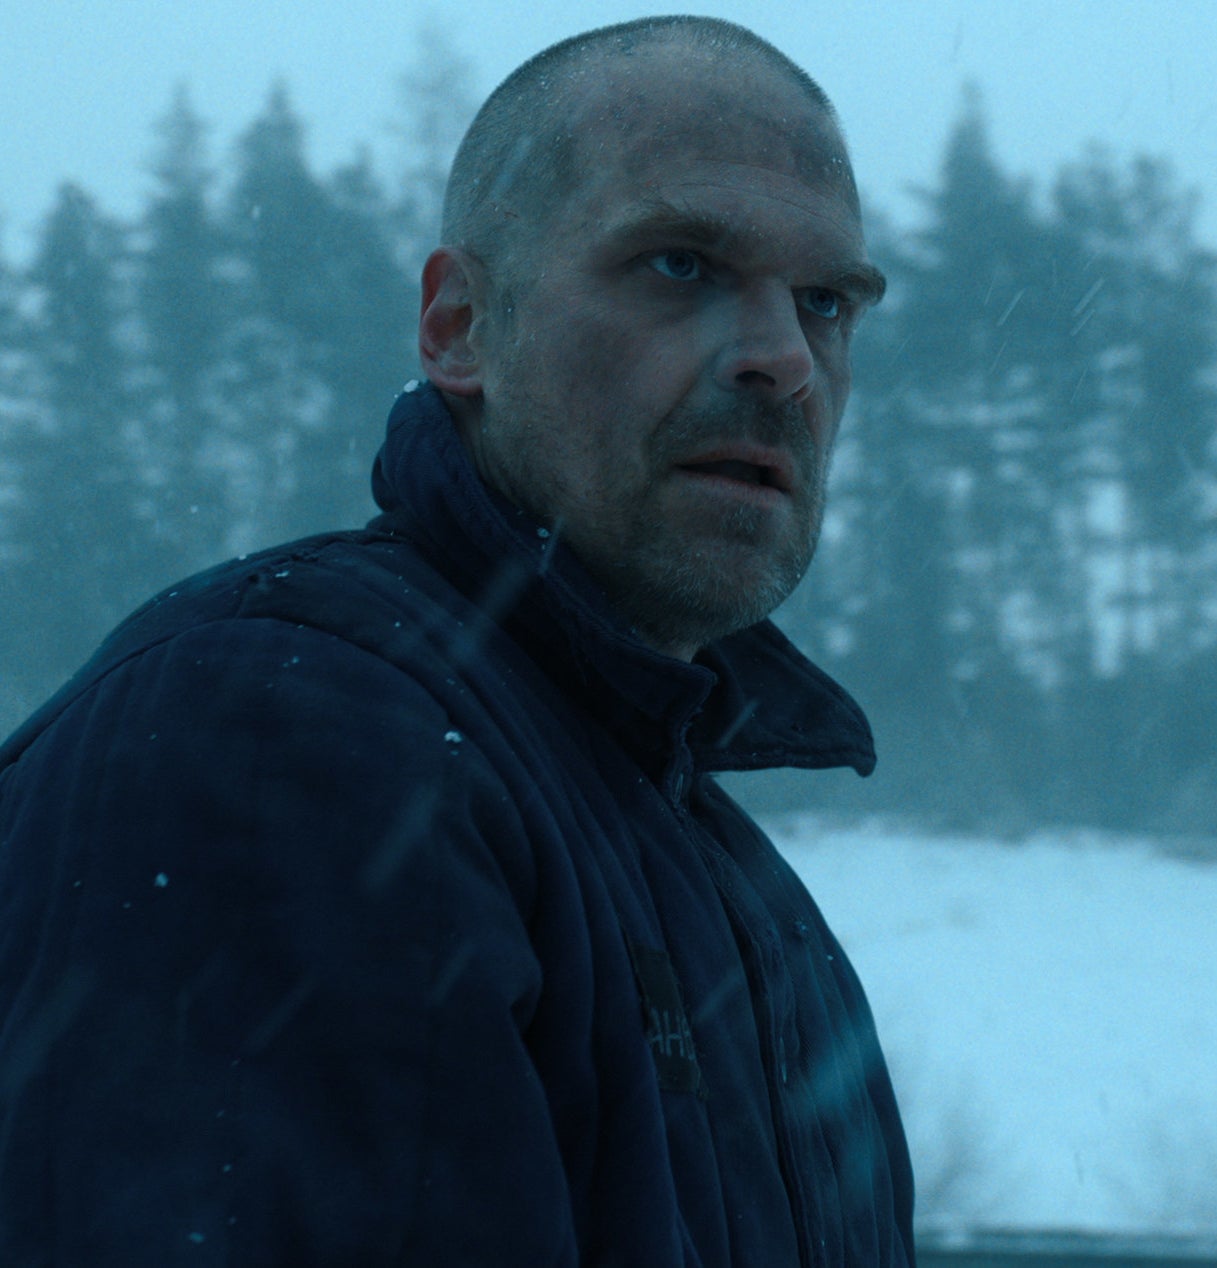 David Harbour outside in the snow